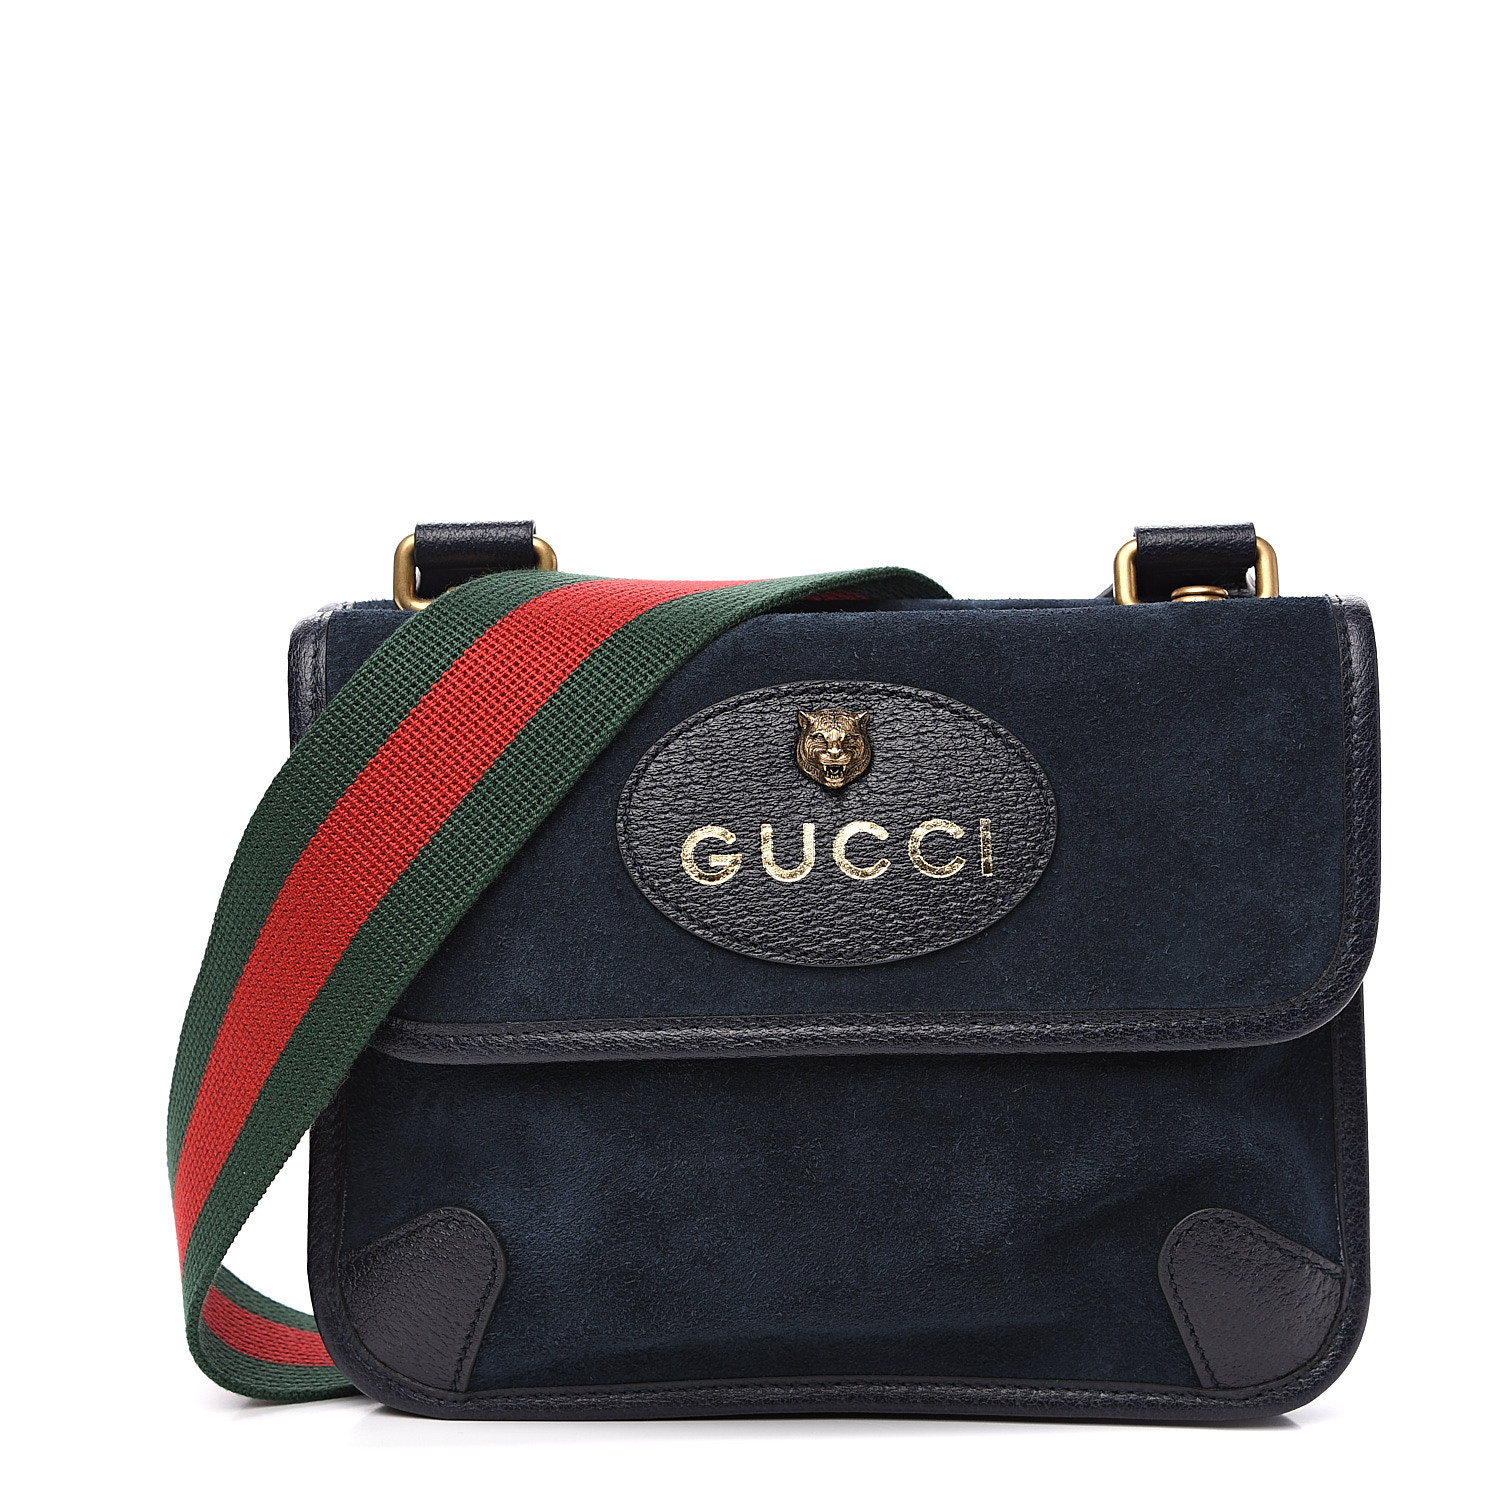 GUCCI Suede Neo Vintage Web Small Messenger Bag Navy 558904